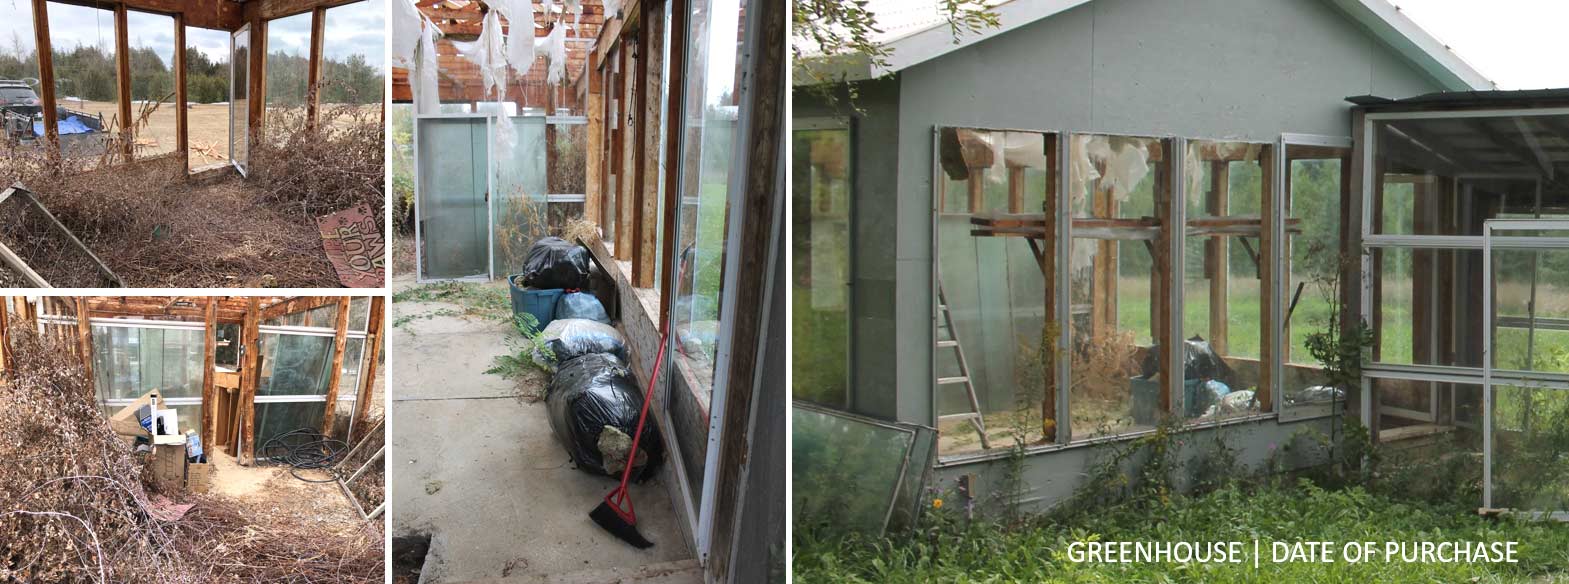 A greenhouse filled with overgrown bushes, garbage and insulation hanging from the ceiling.